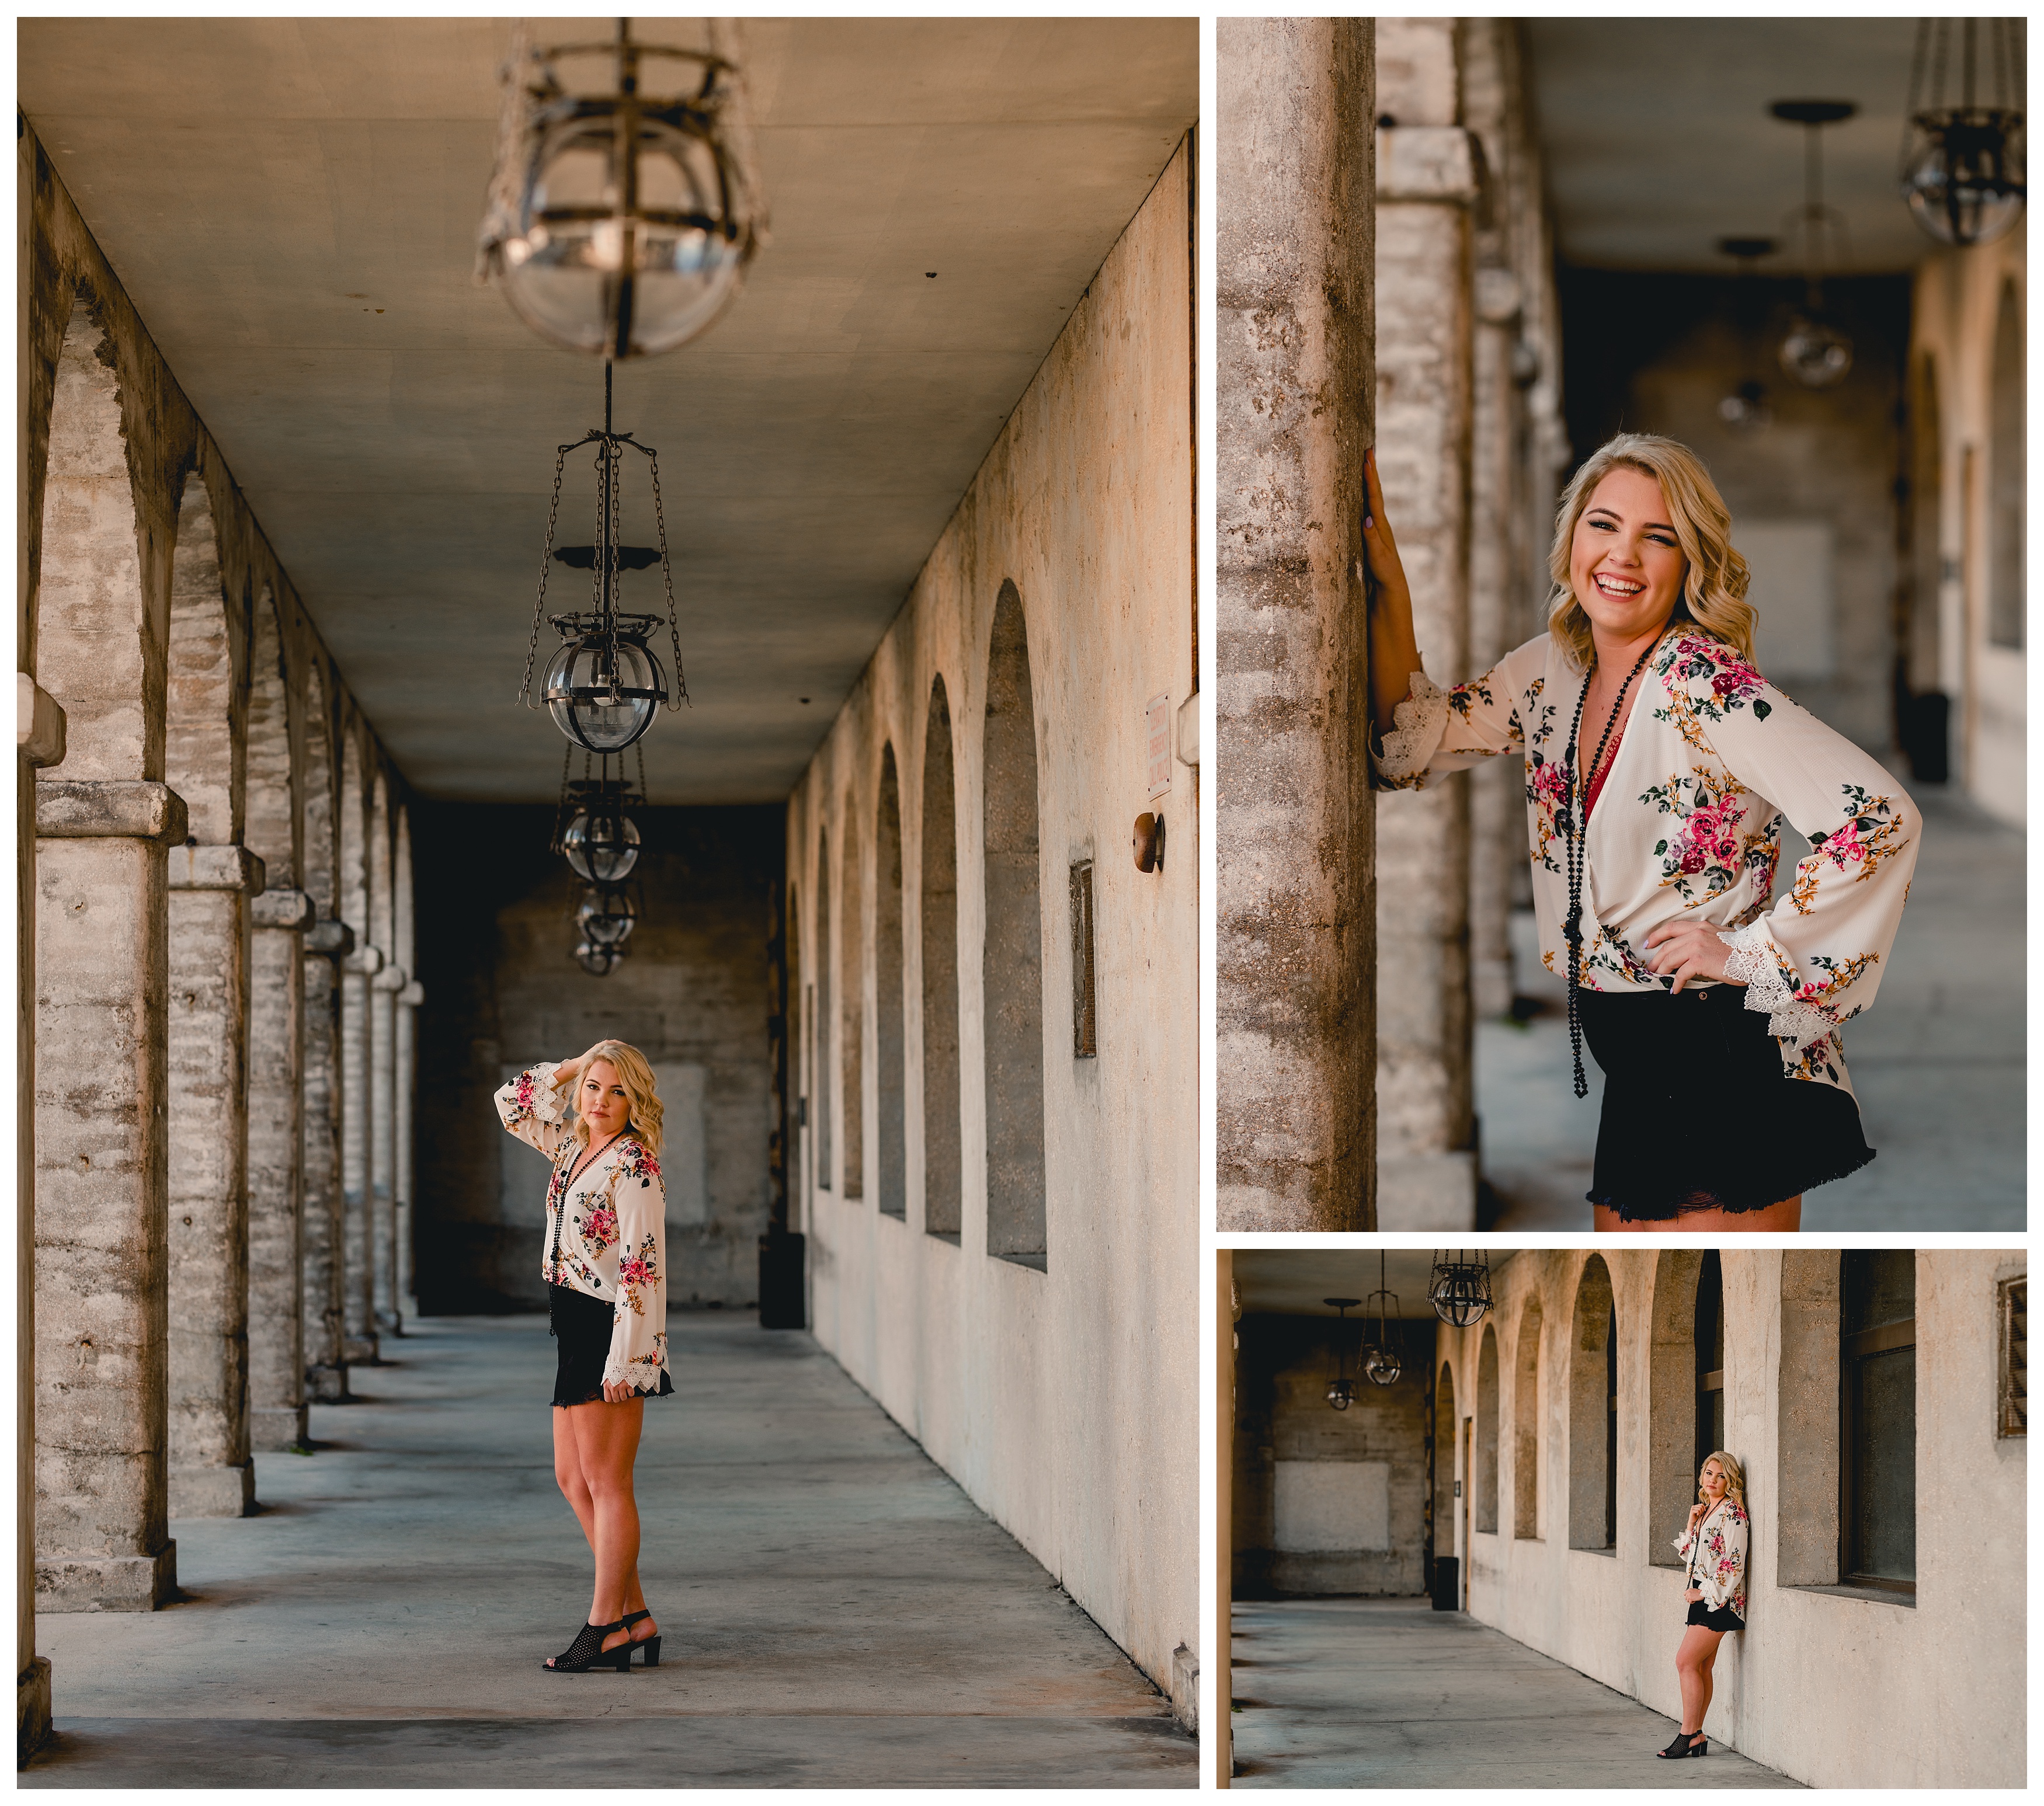 Lightner museum senior pictures in St. Augustine, FL. Shelly Williams Photography